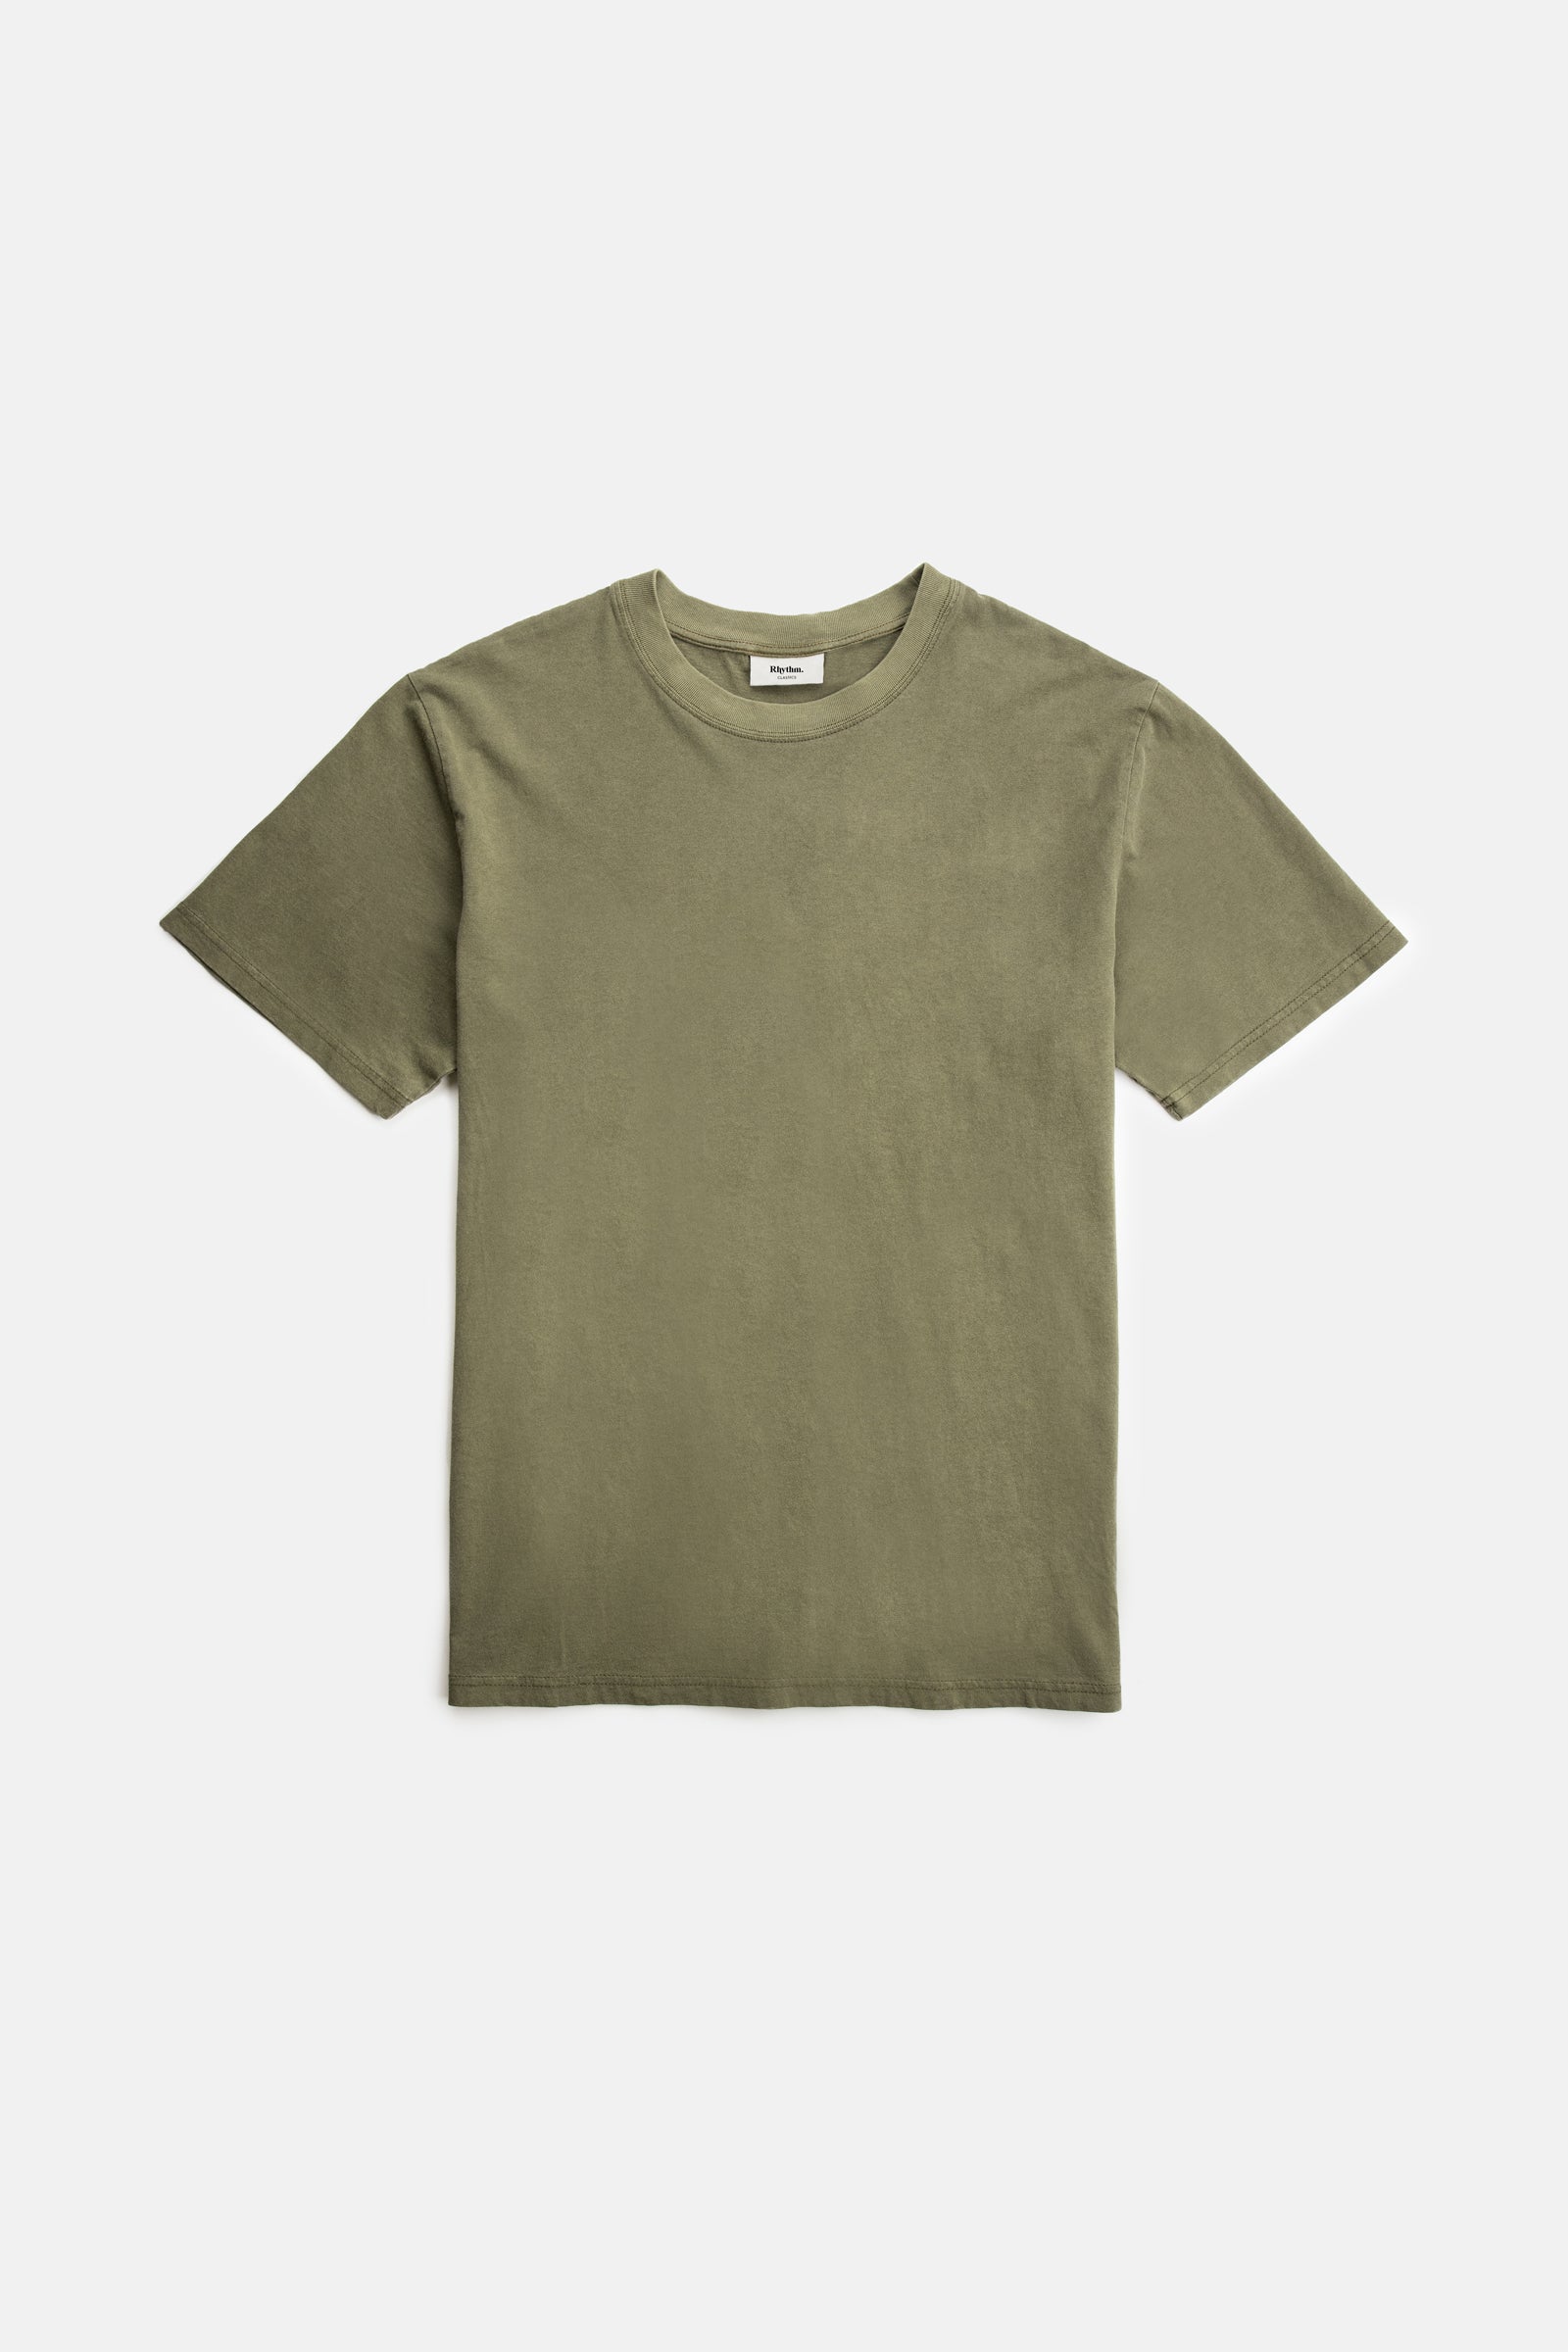 Cotton Vintage Washed Heavy Weight Short Sleeve T-Shirt Green – Rhythm US